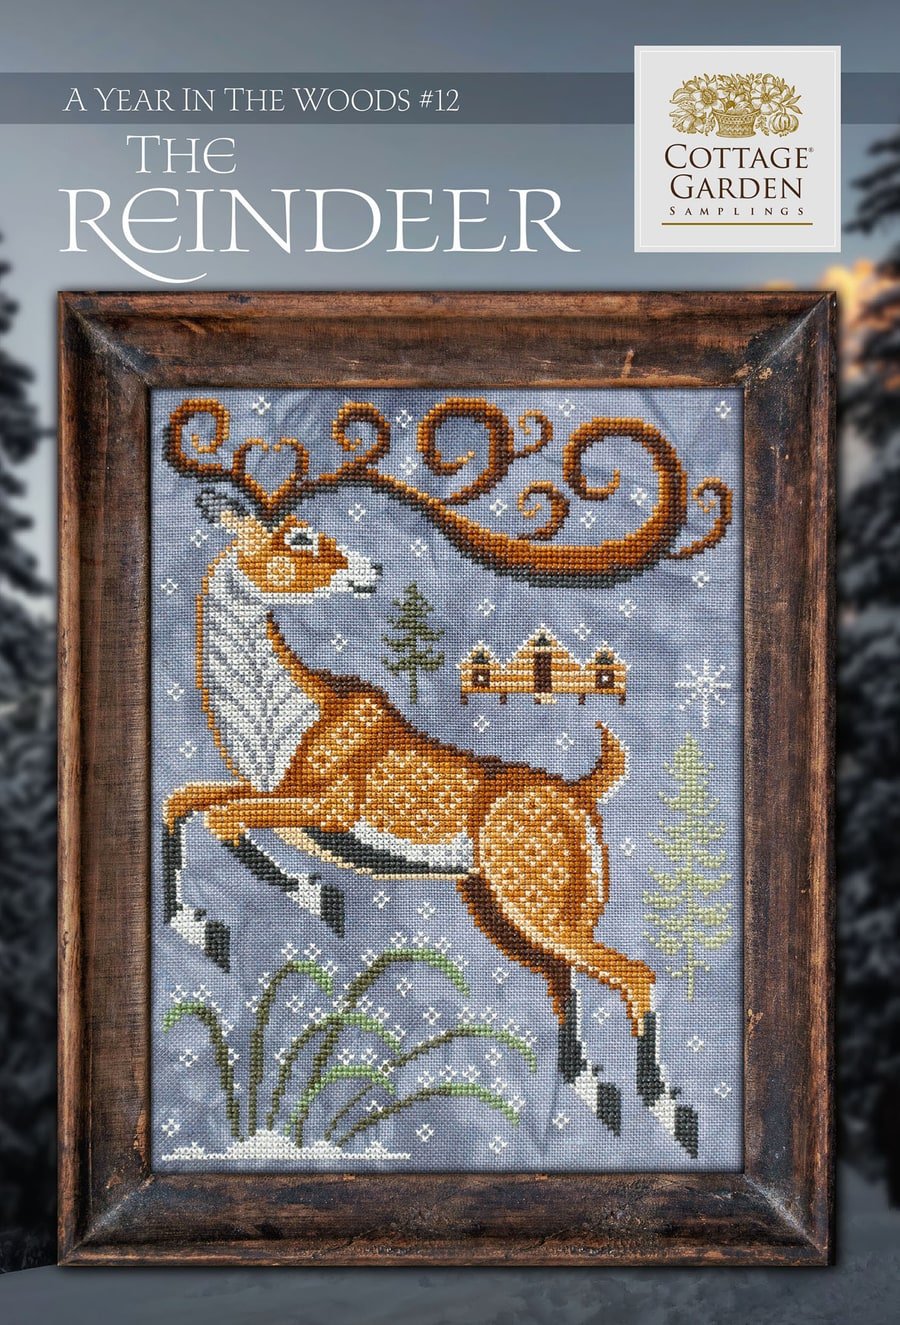 Cottage Garden Samplings - A Year in The Woods #12 The Reindeer